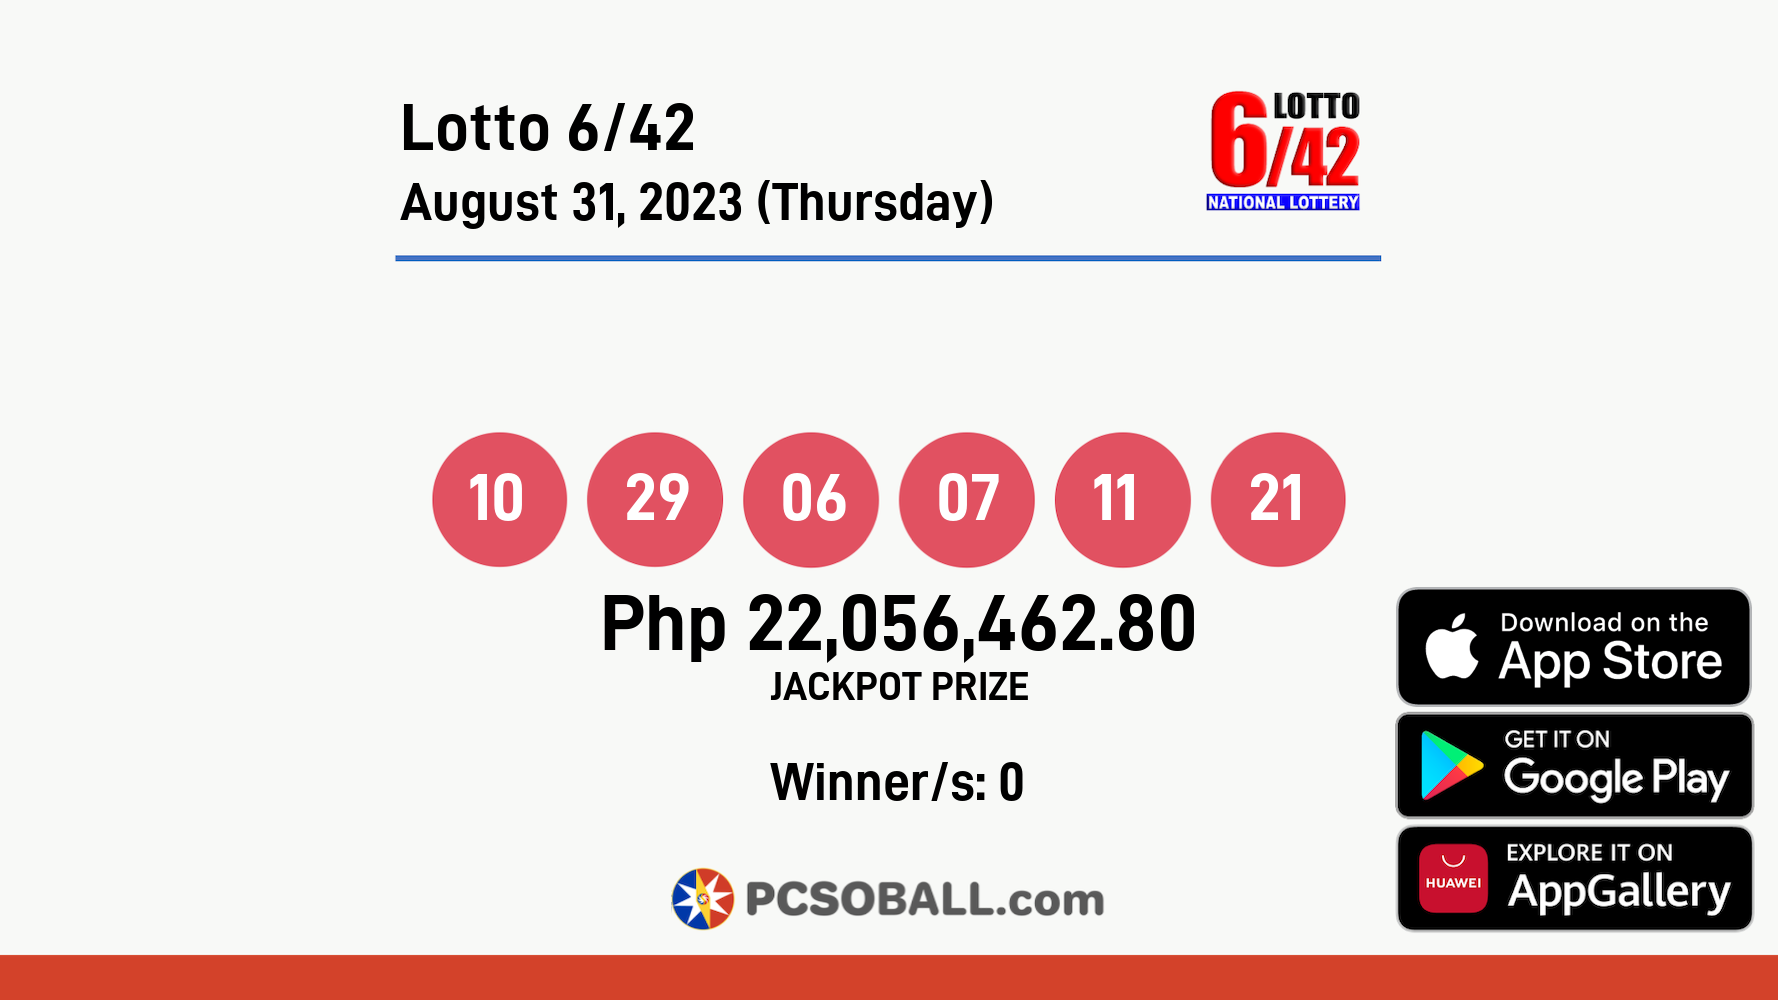 Lotto 6/42 August 31, 2023 (Thursday) Result